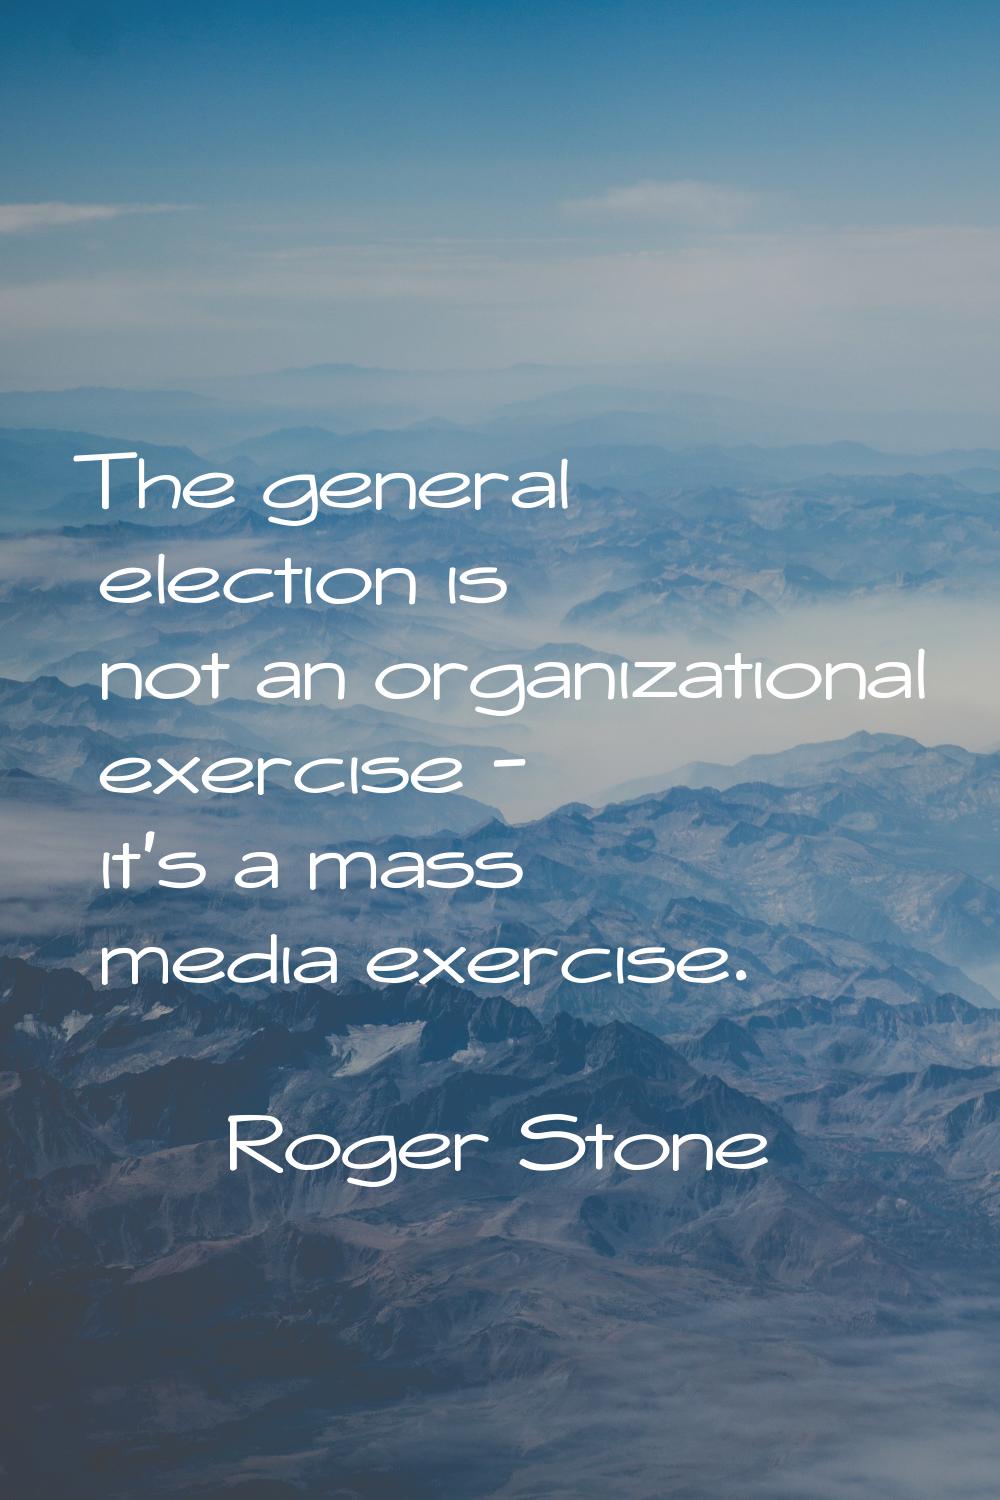 The general election is not an organizational exercise - it's a mass media exercise.